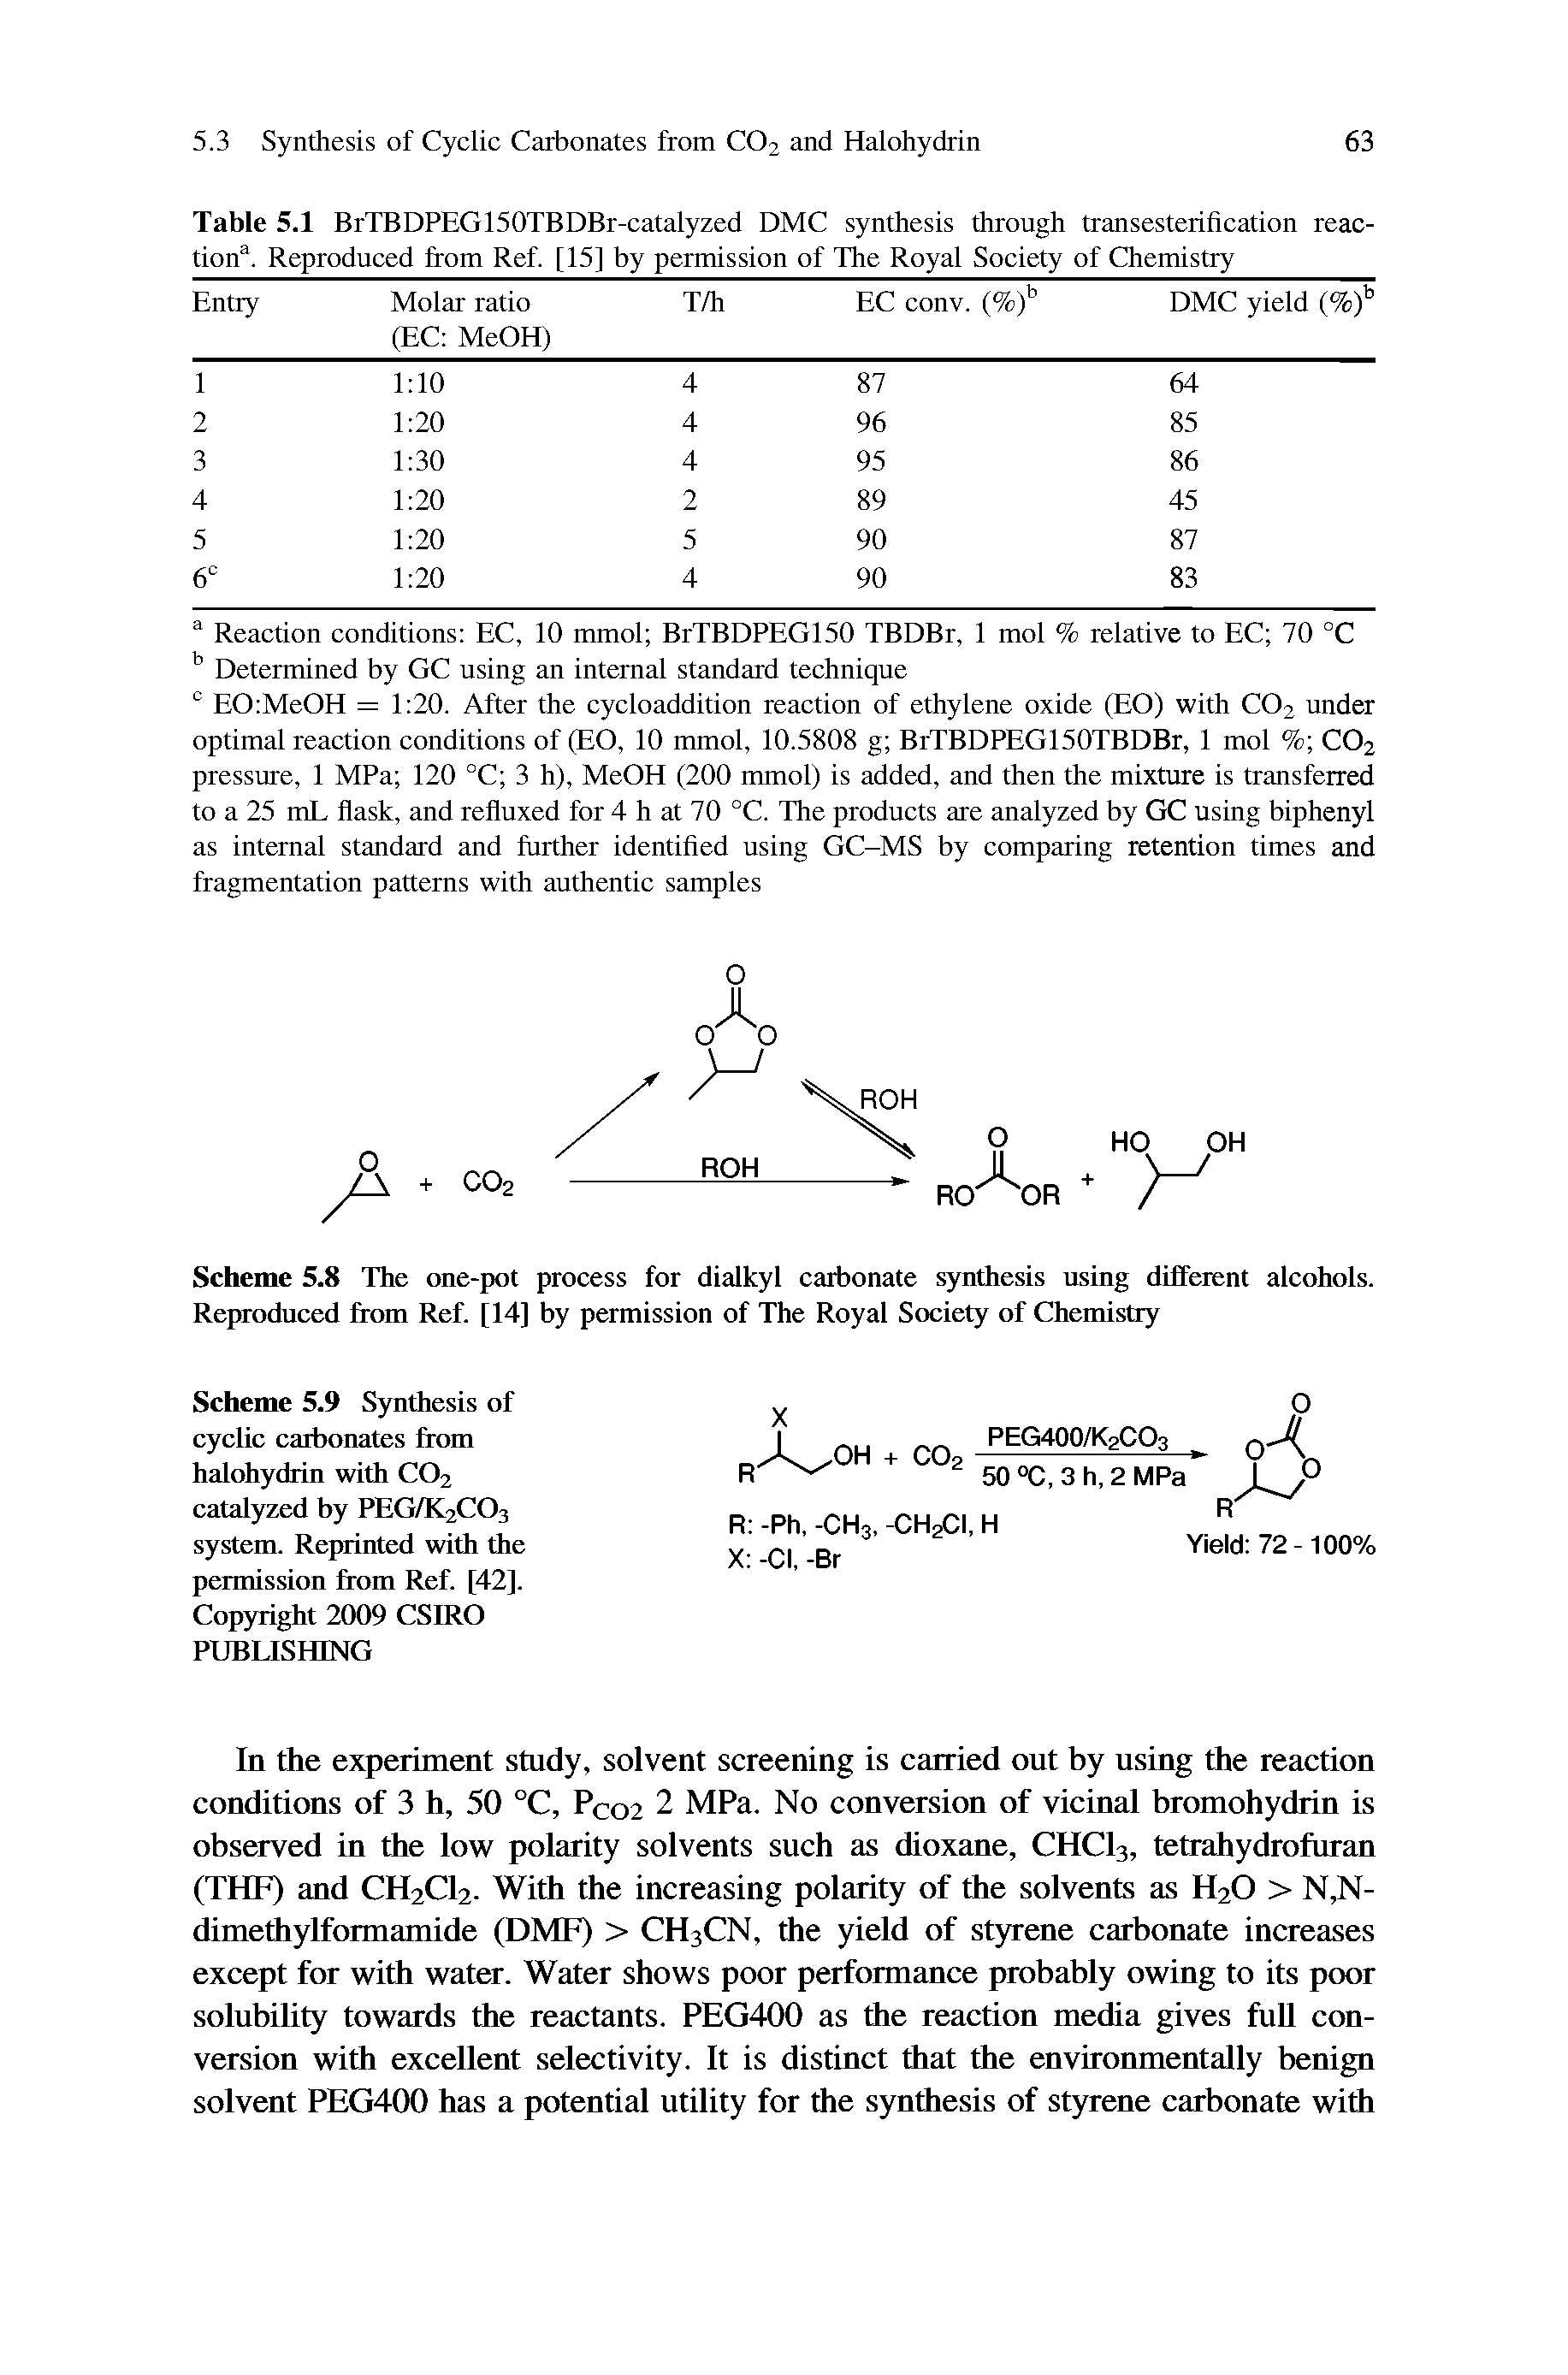 Scheme 5.8 The one-pot process for dialkyl carbonate synthesis using different alcohols. Reproduced from Ref. [14] by permission of The Royal Society of Chemistry...